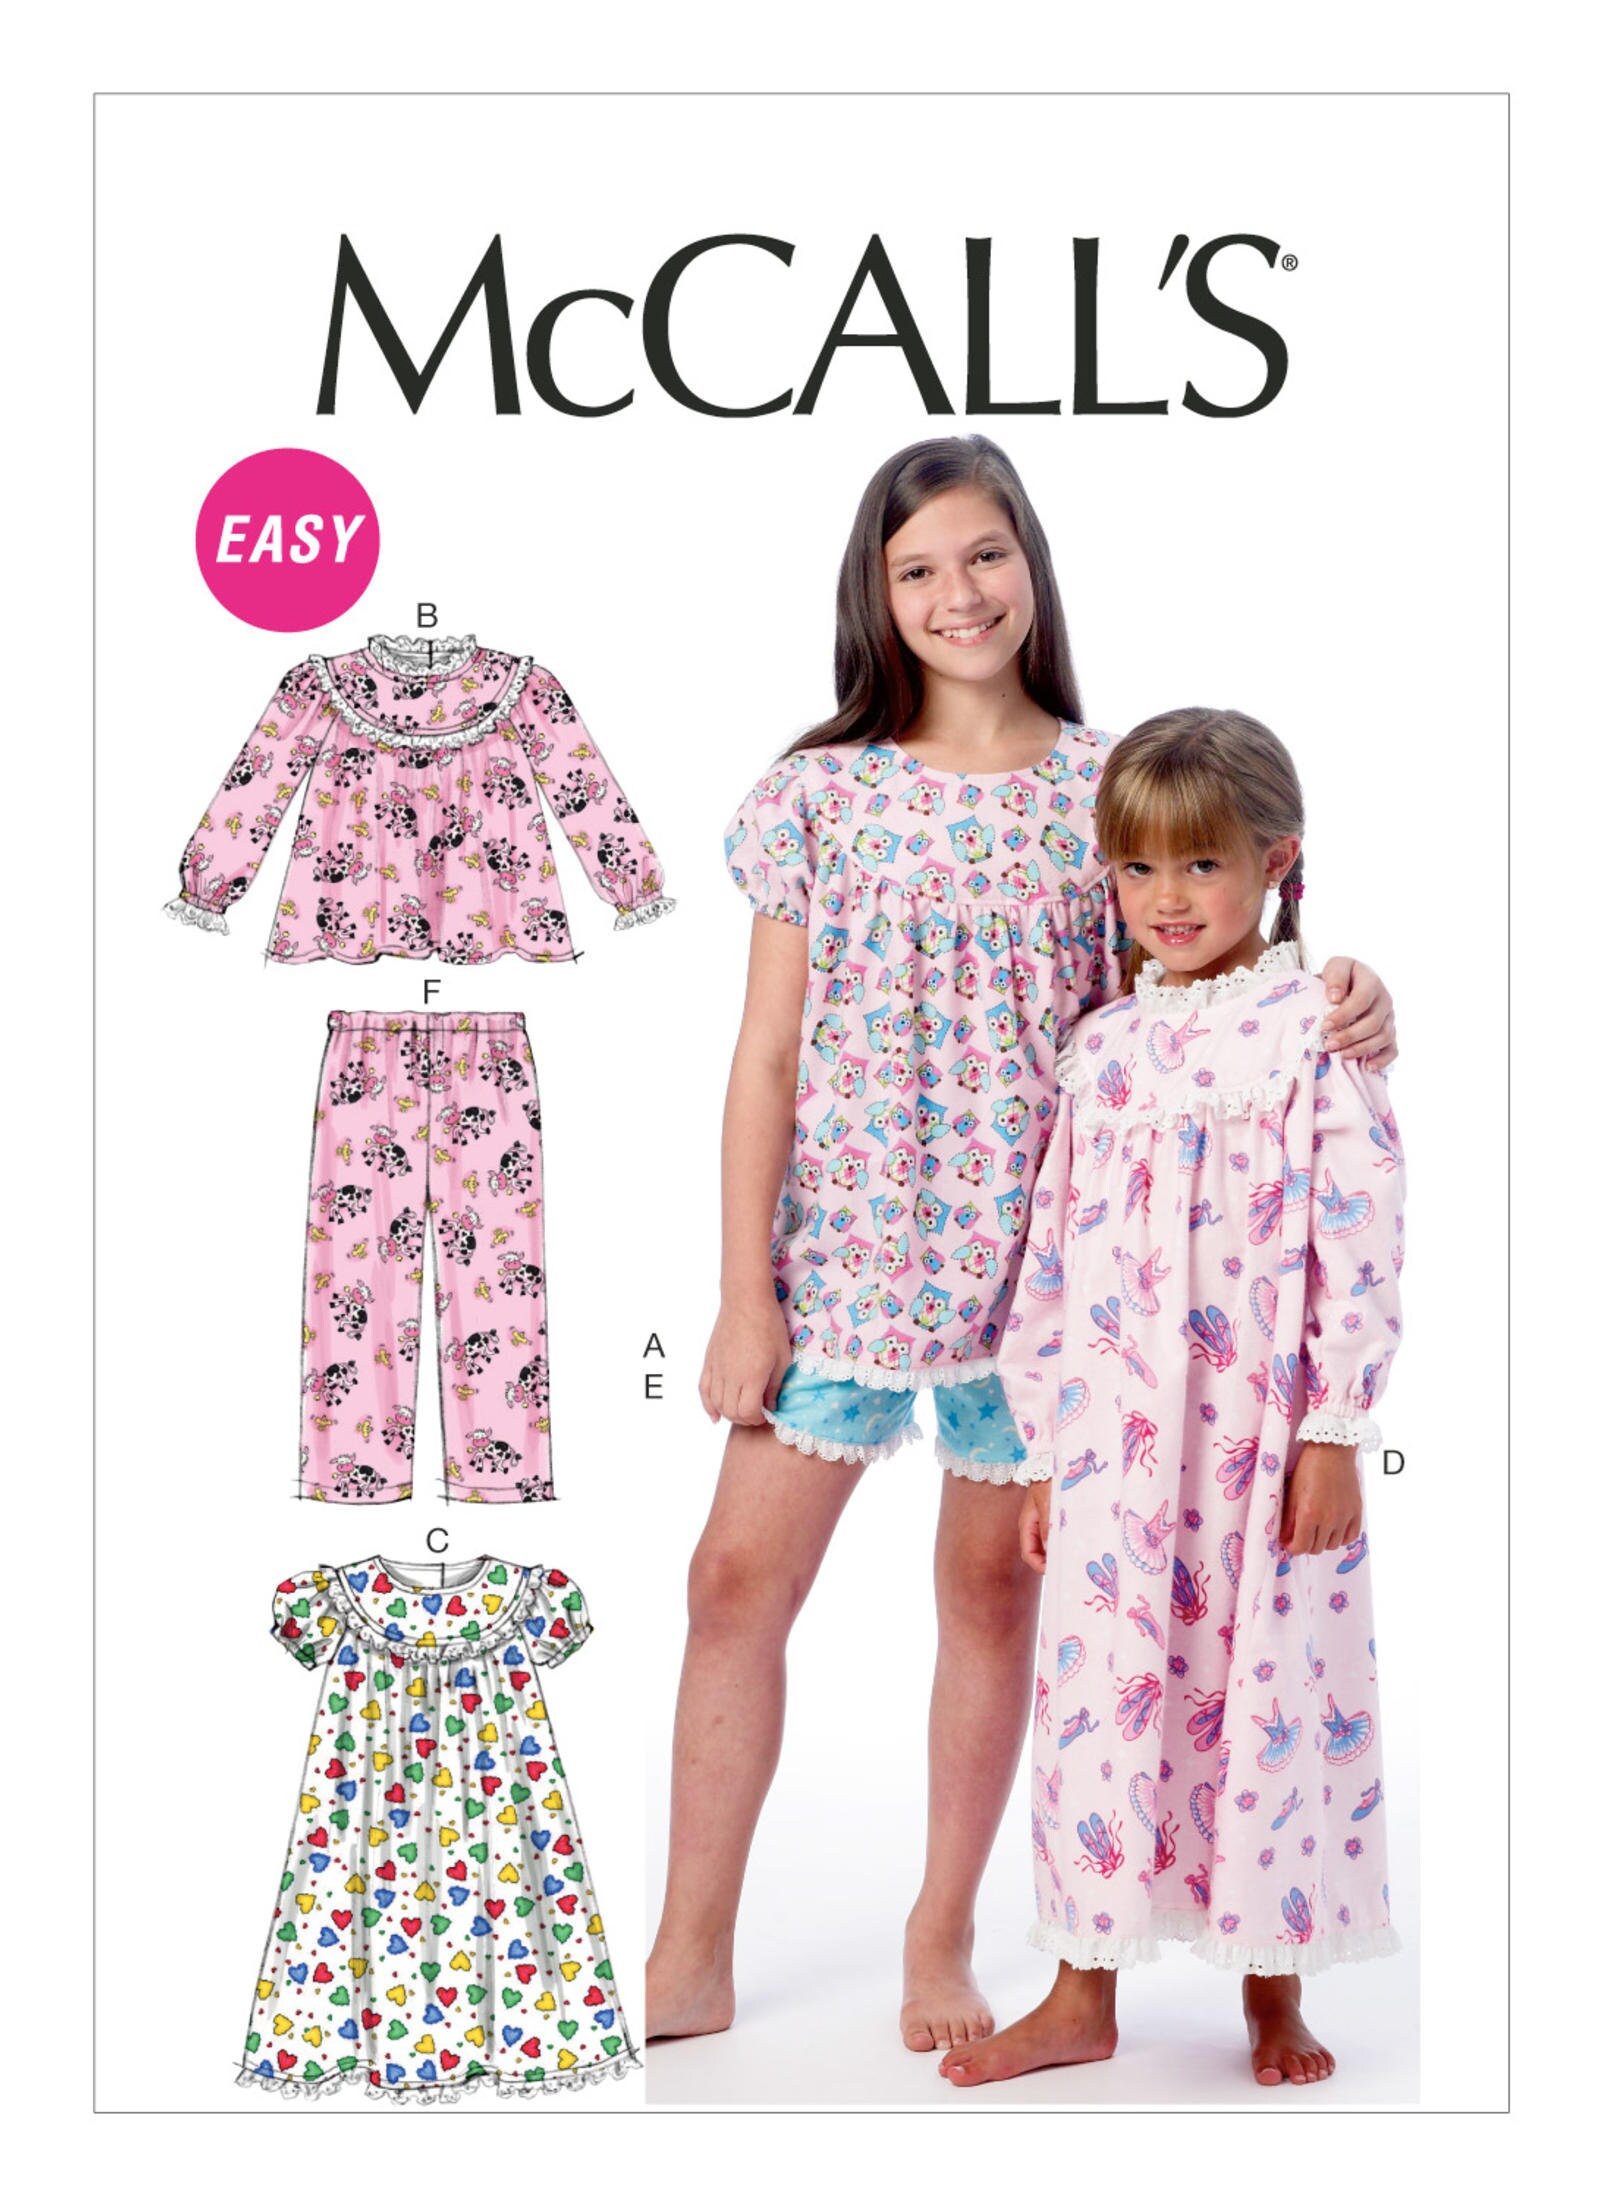 McCall's Sewing Pattern M8283 - Children's and Girls' Dresses, Size: CCE (3-4-5-6), Girl's